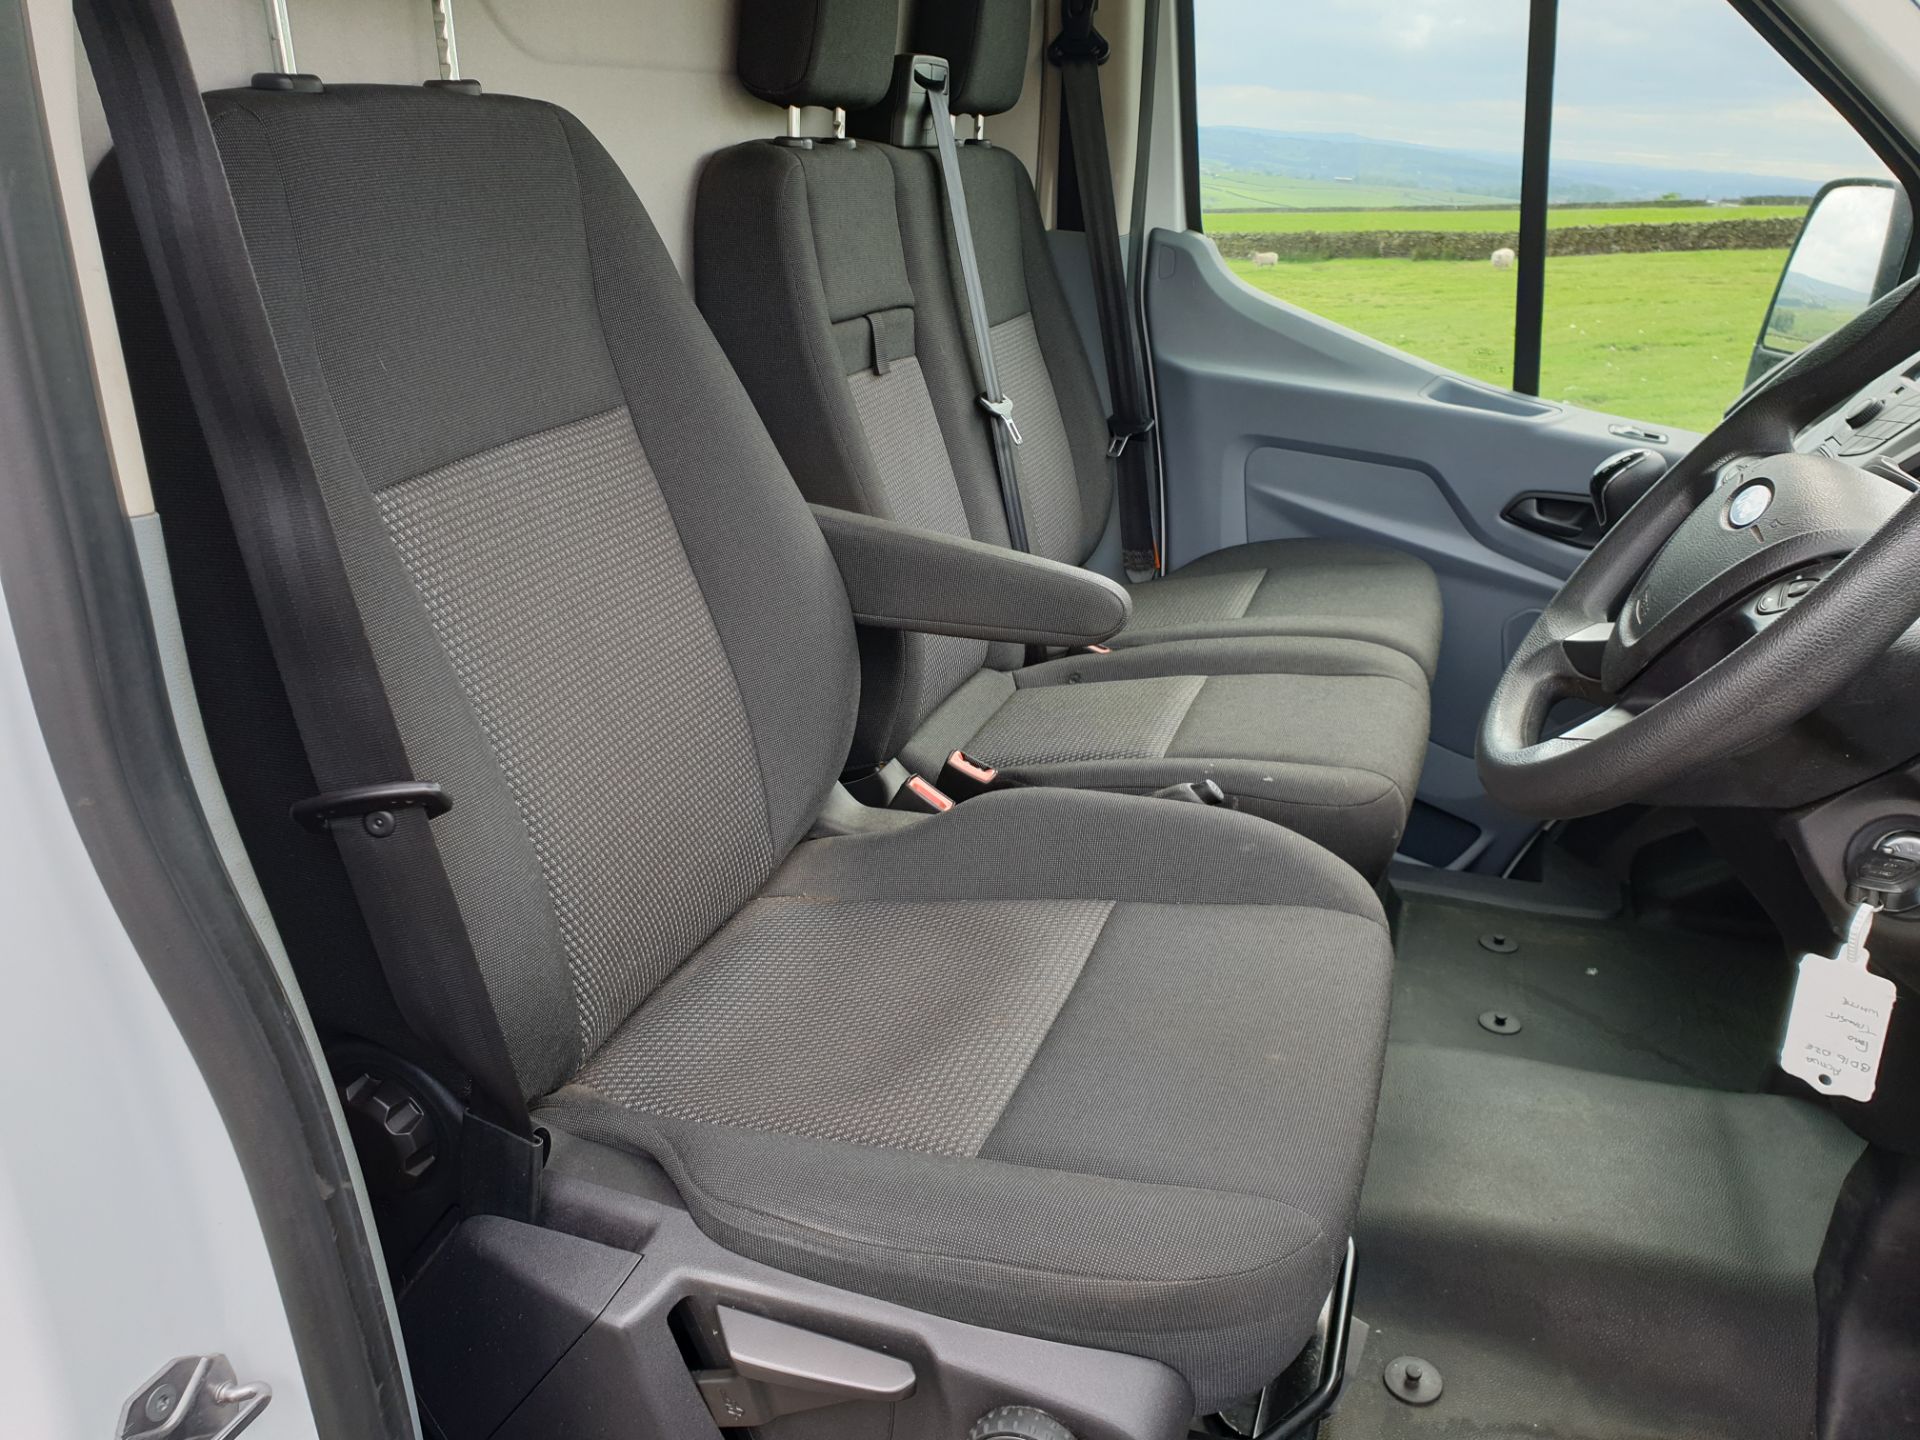 2016 / 16 Ford Transit L3H2 Fwd 350 - Image 10 of 14